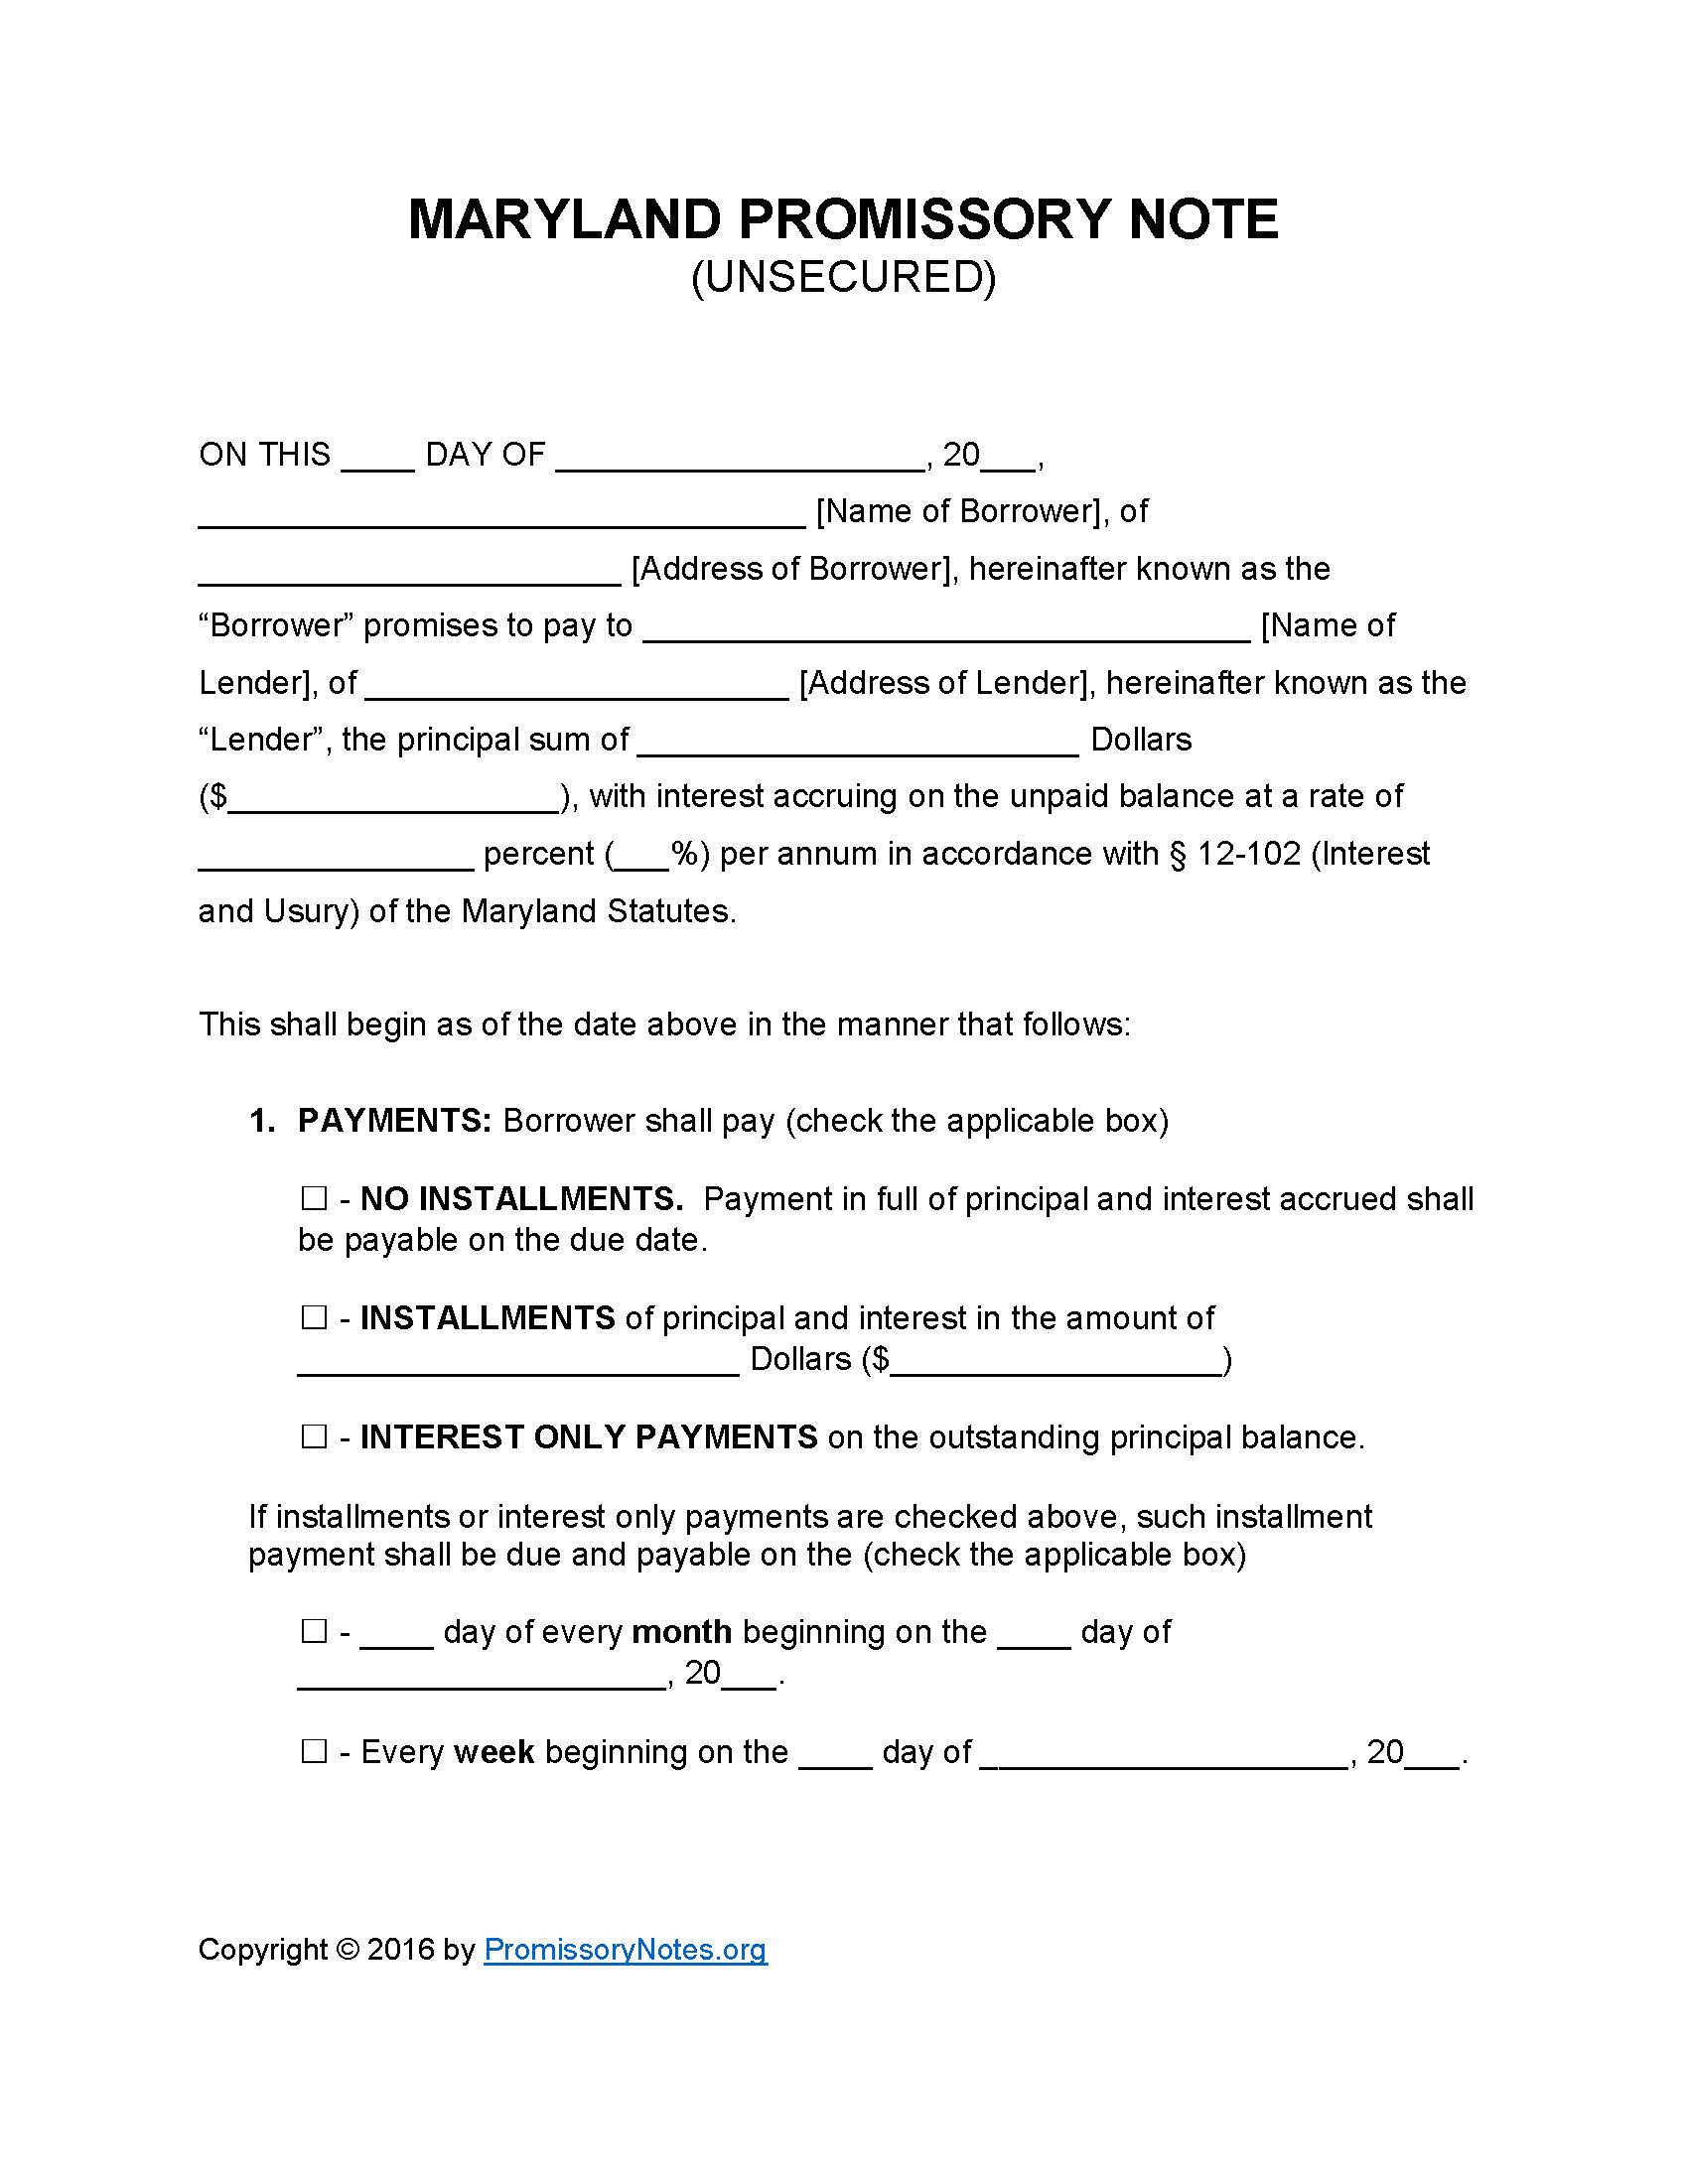 maryland-unsecured-promissory-note-form